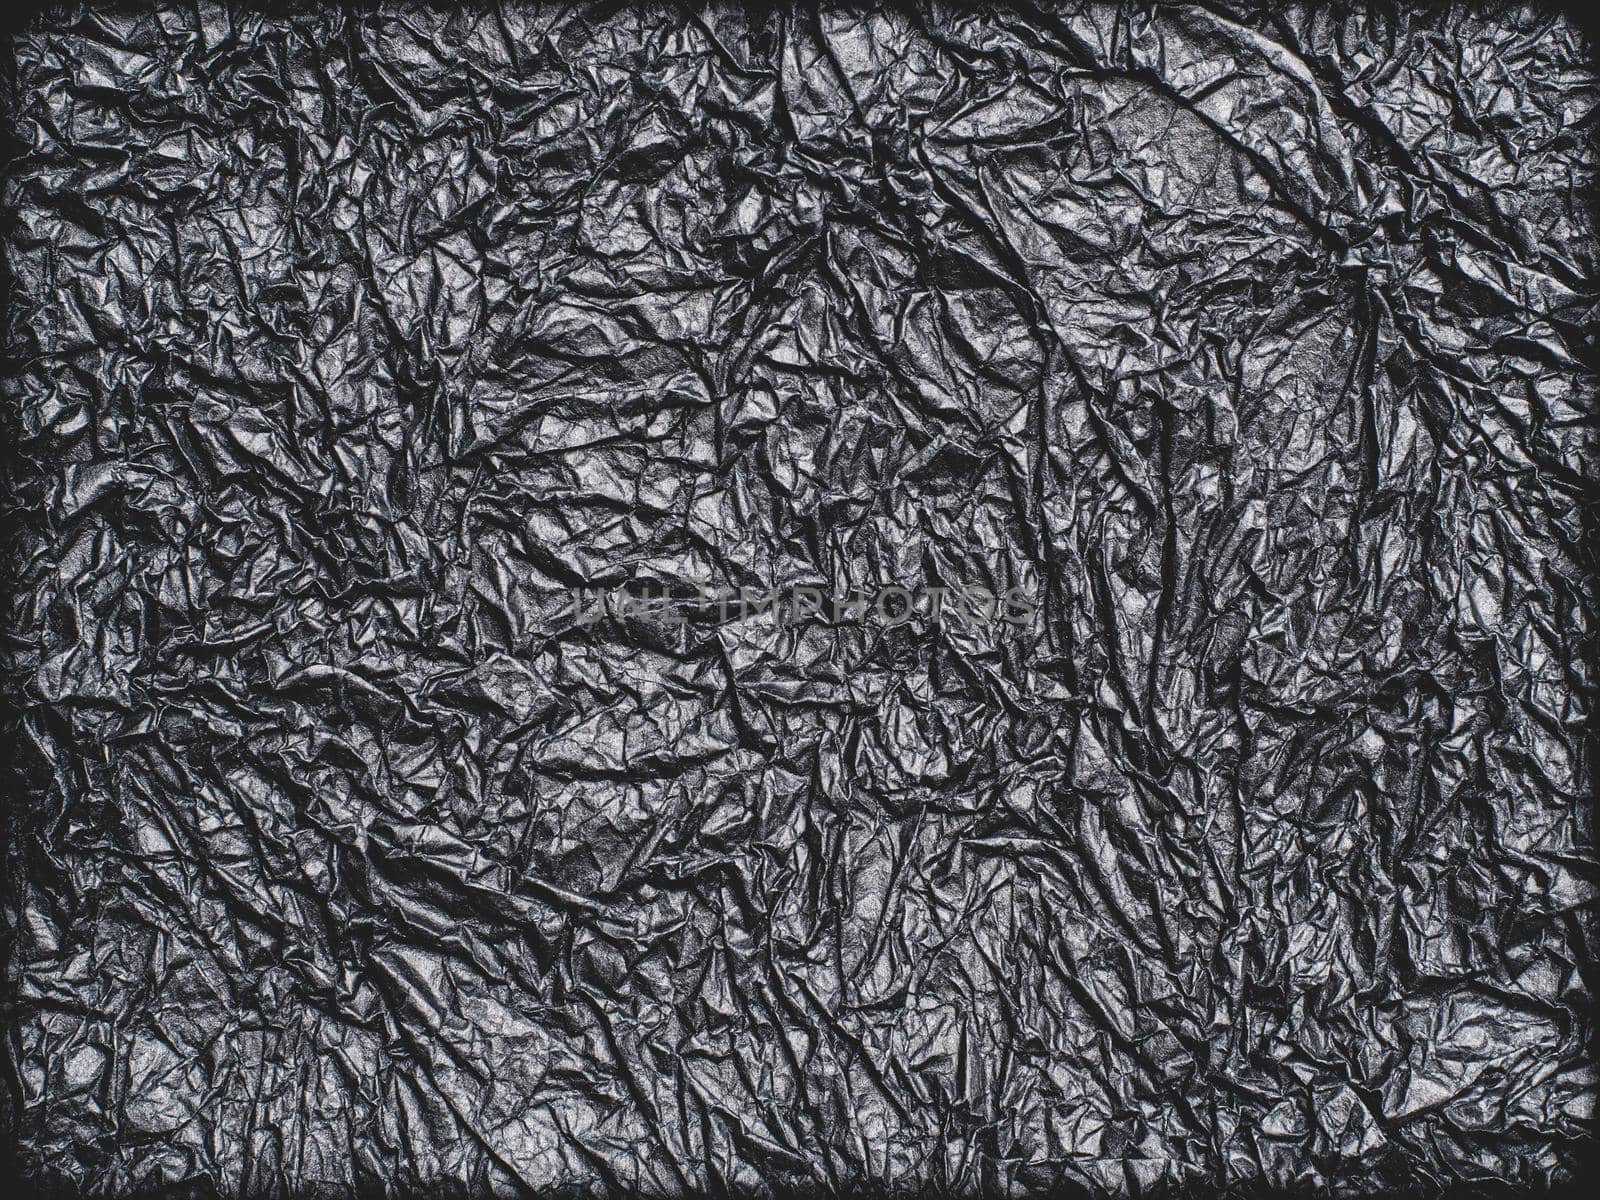 Crumpled paper for background image. Paper texture, a sheet of black wrinkled paper